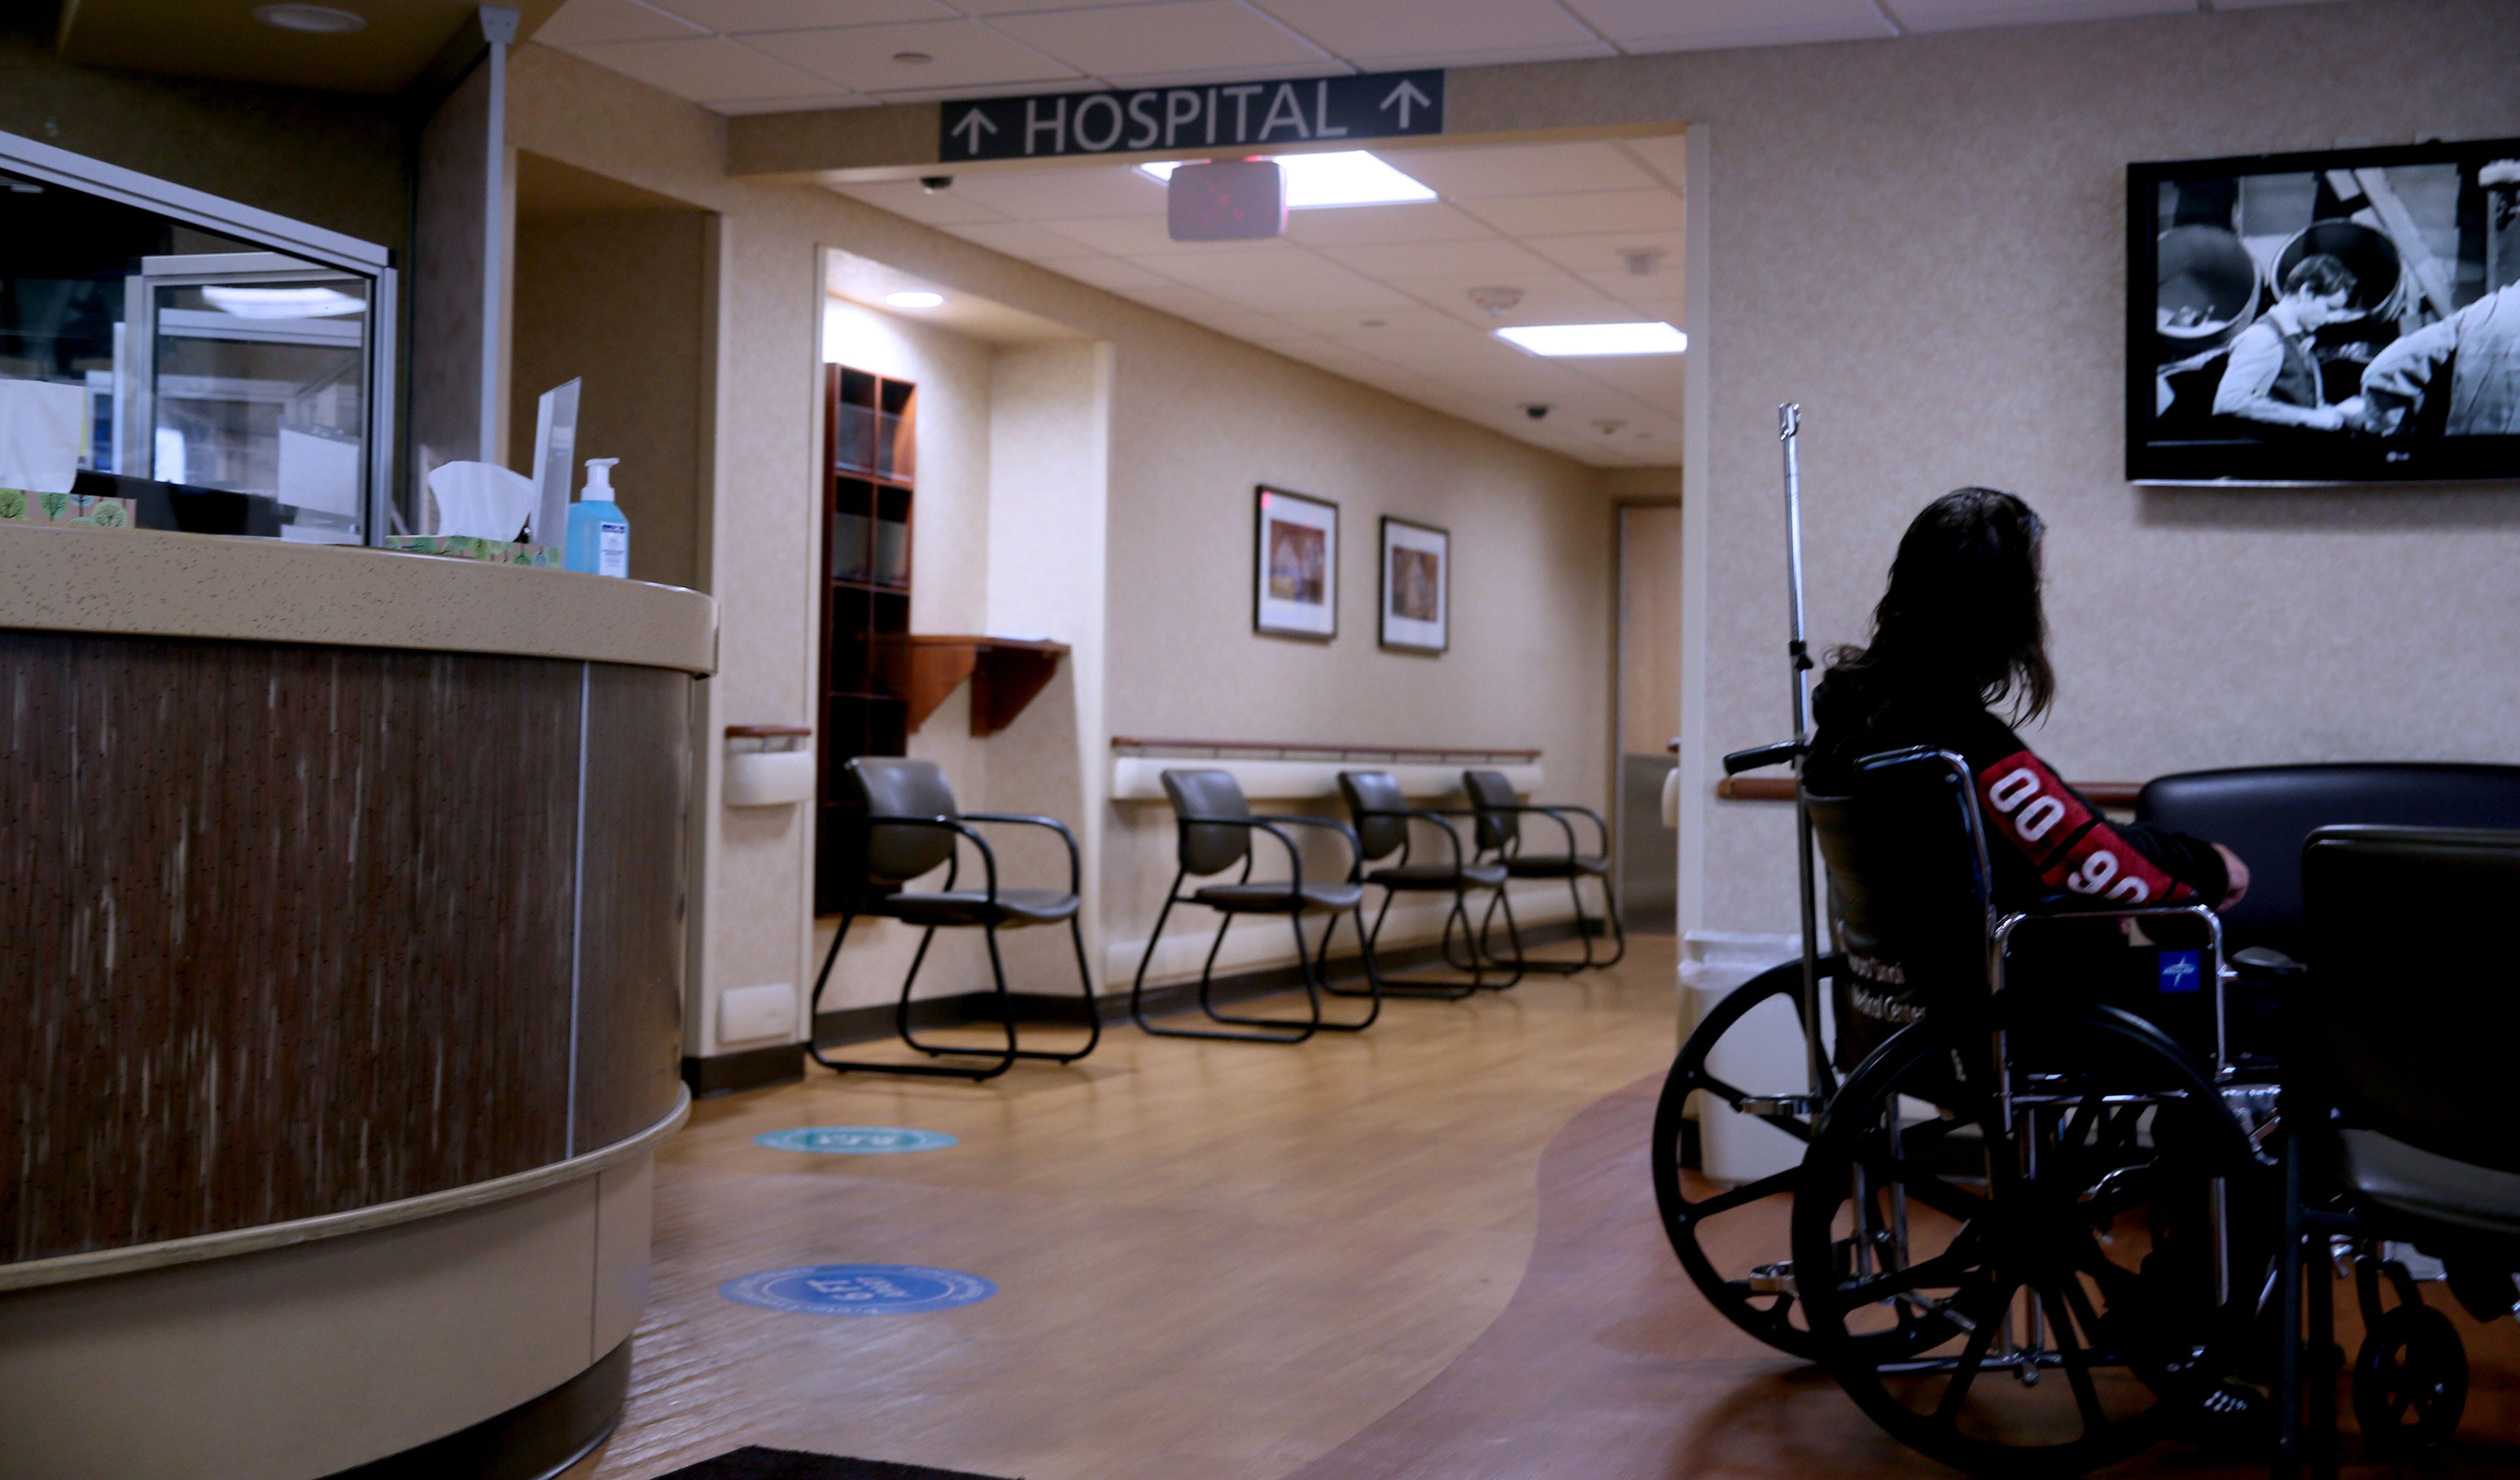 A patient waits in the emergency department of Ascension SE Wisconsin Hospital - St. Joseph Campus in Milwaukee.